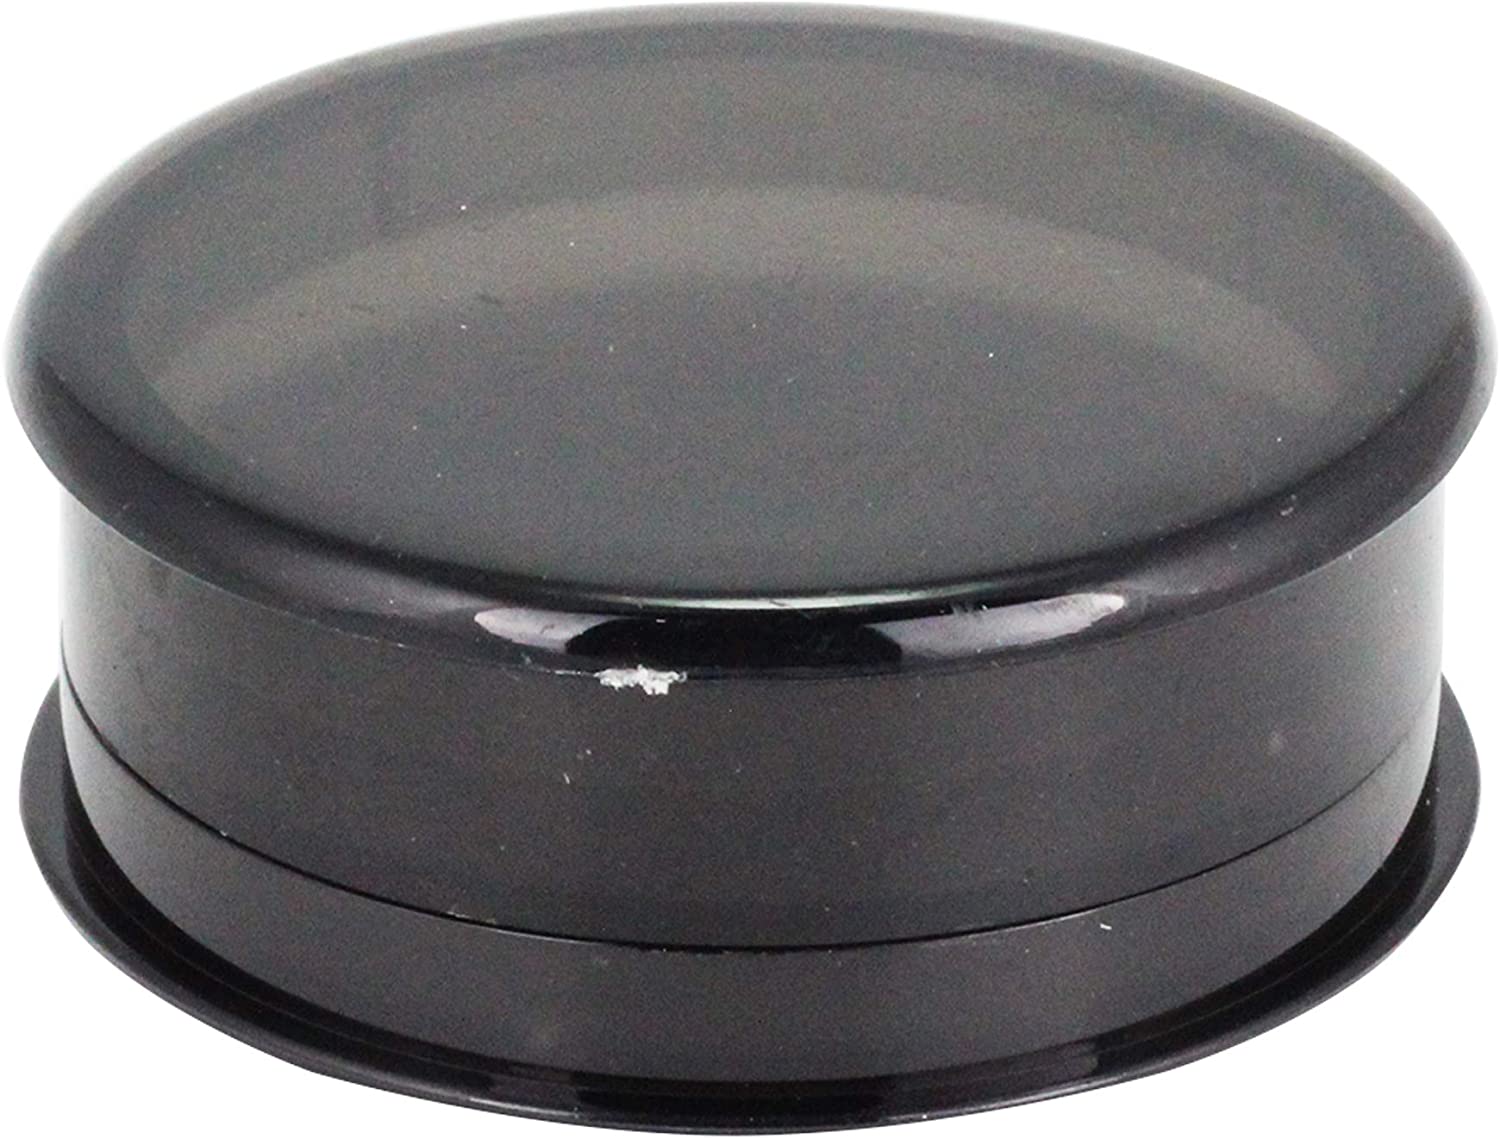 Spliff 1 x grinder plastic 60 mm for tobacco and herb three parts including storage Choose your favourite colour (black)